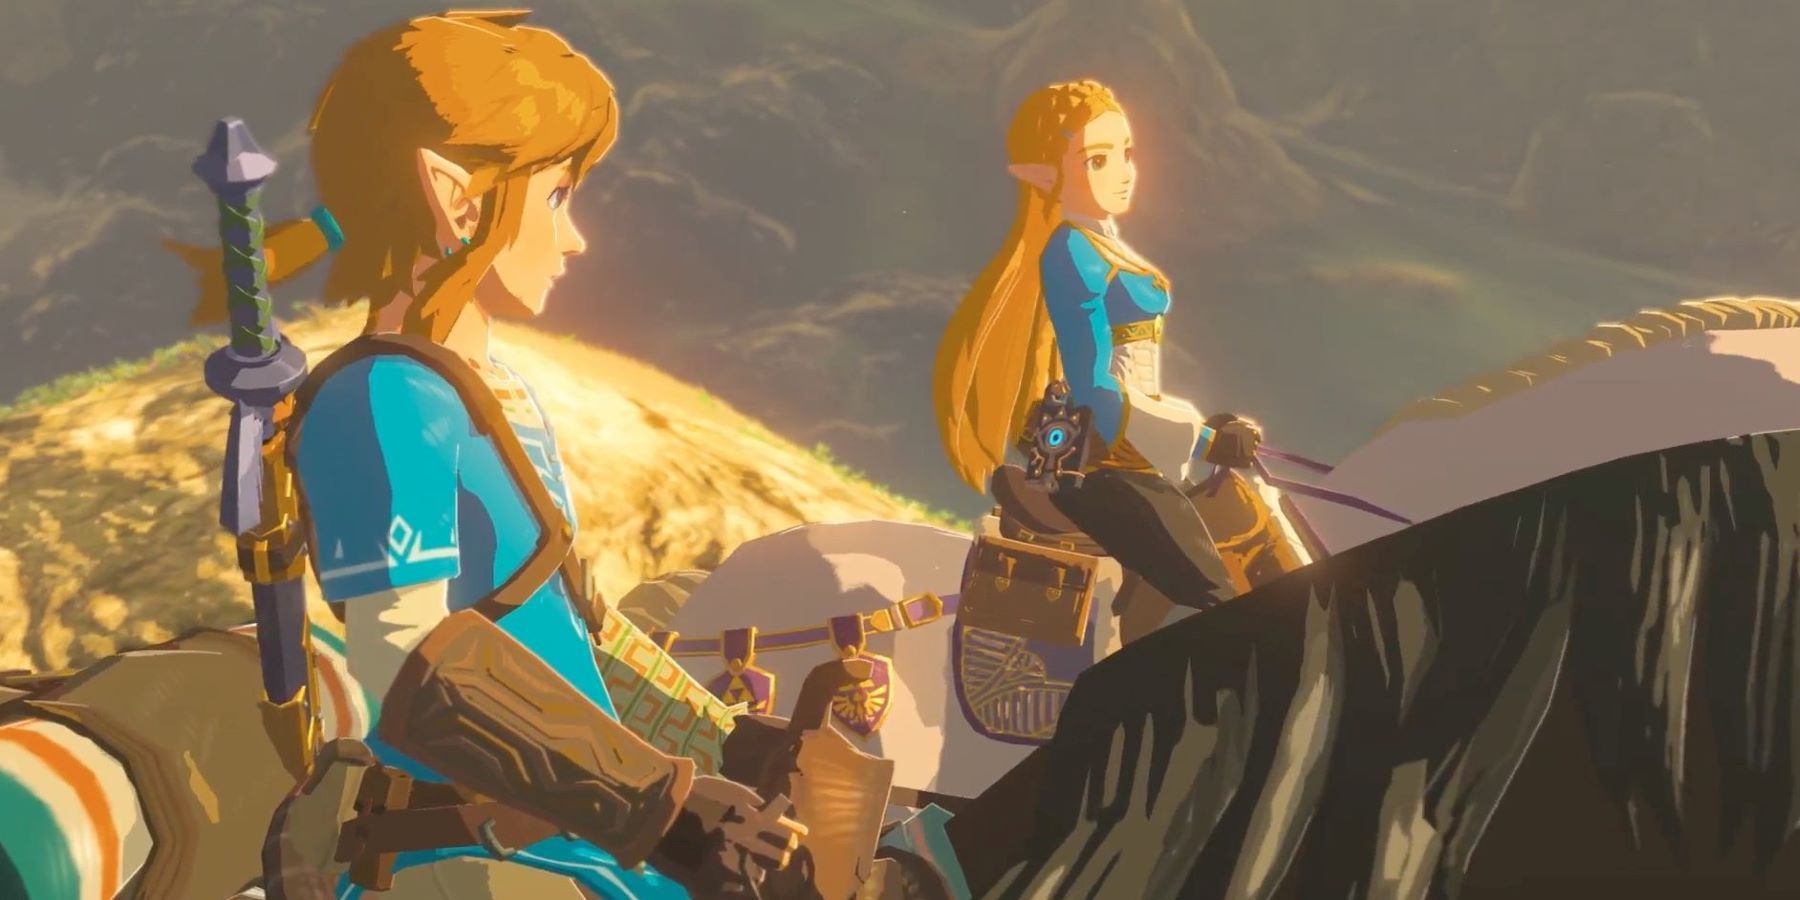 Link and Zelda riding on horseback together in a Memory from The Legend of Zelda: Breath of the Wild 2